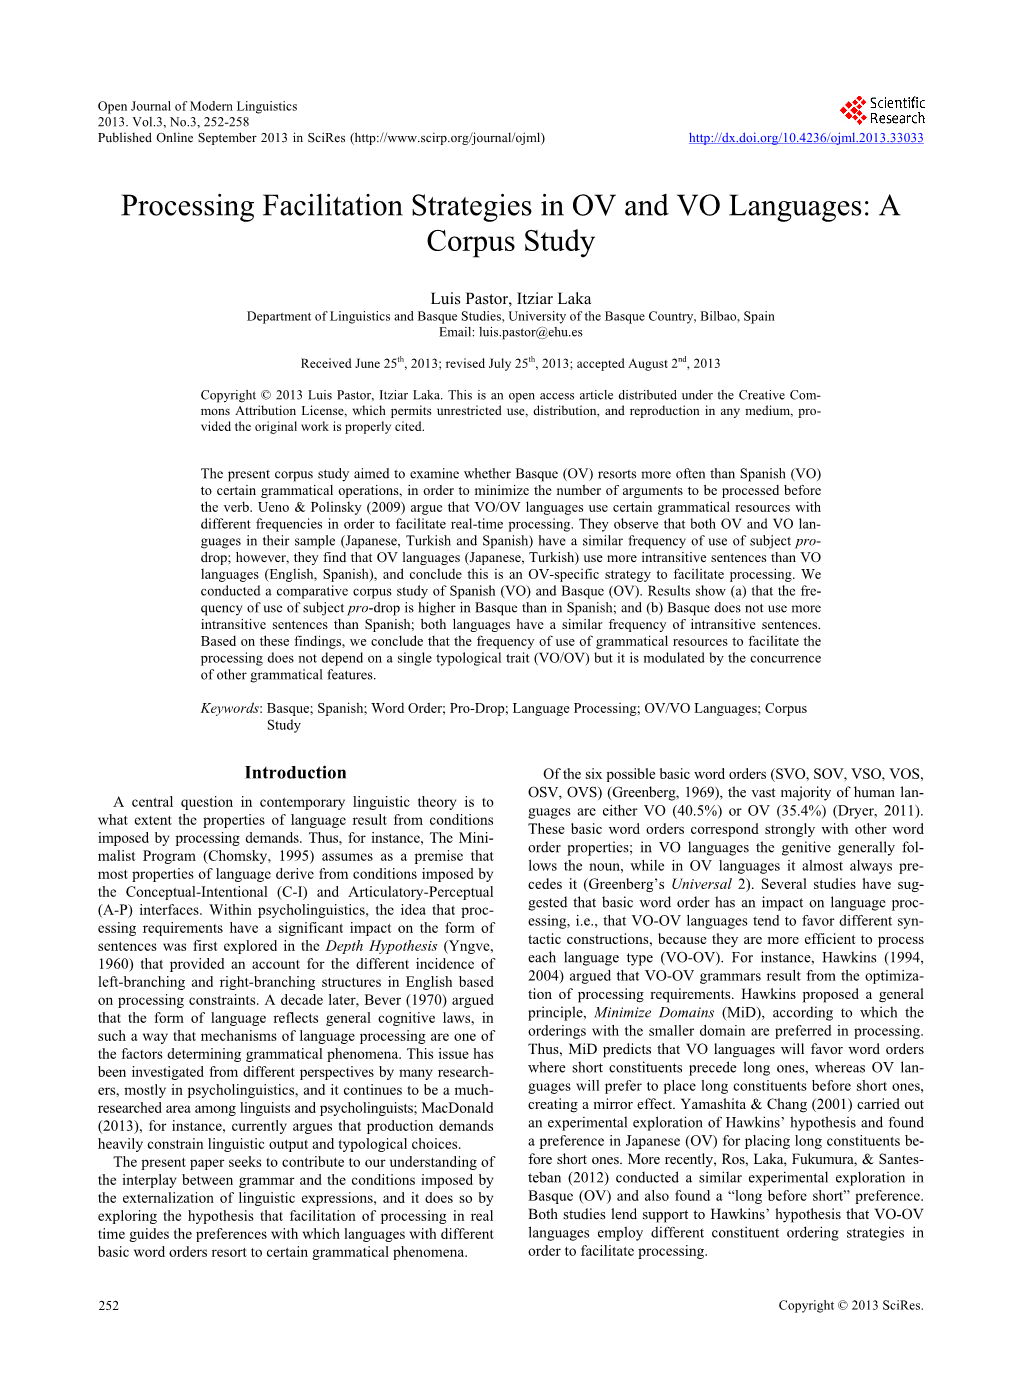 Processing Facilitation Strategies in OV and VO Languages: a Corpus Study